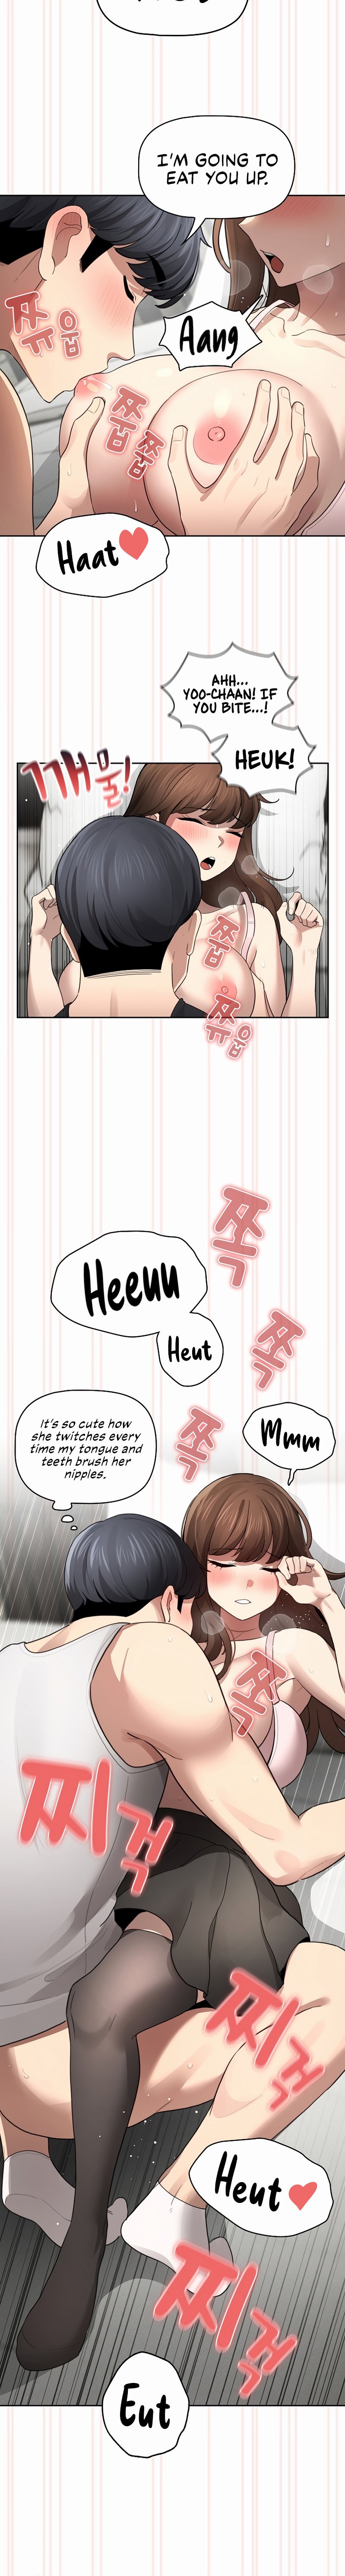 Xem ảnh Private Tutoring In These Trying Times Raw - Chapter 105 - 189a0bdf4f20c0faa6 - Hentai24h.Tv